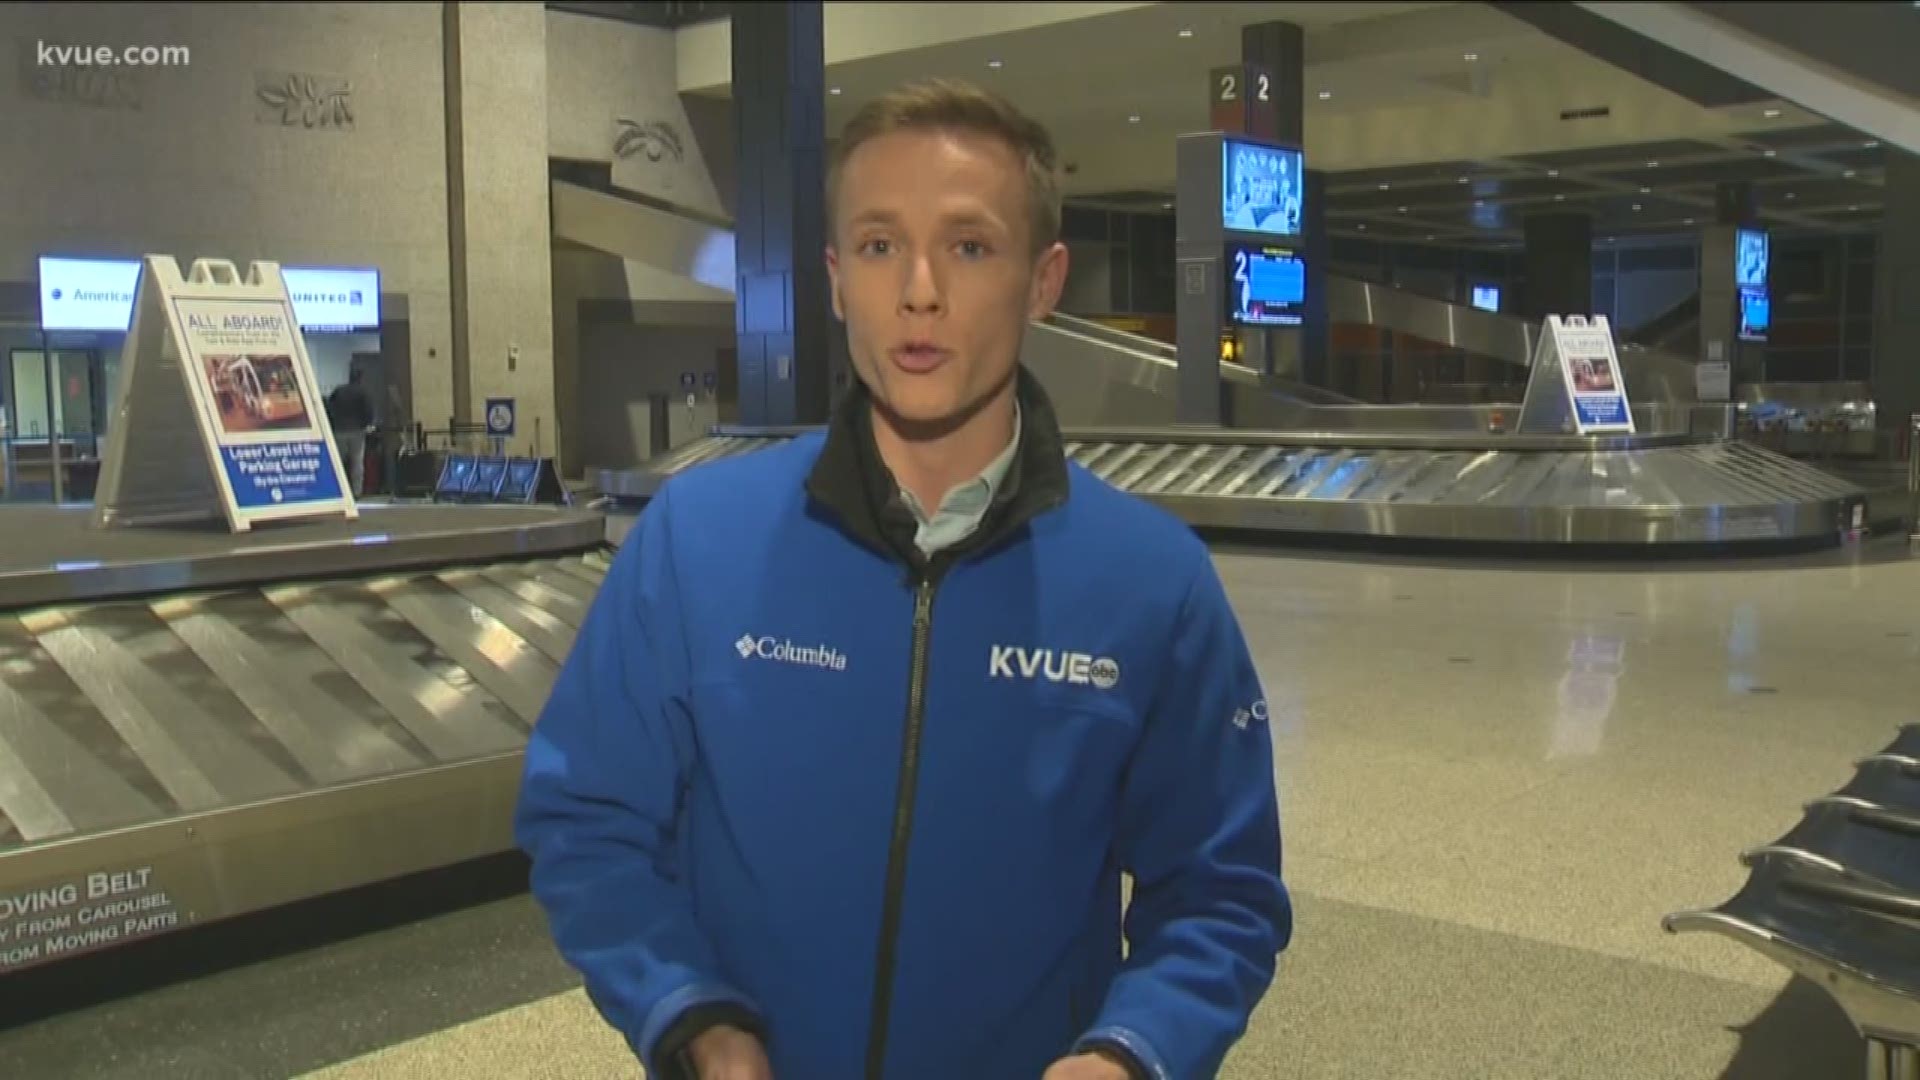 Last year was the busiest year for the airport, with nearly 17.5 million flyers coming through Austin.